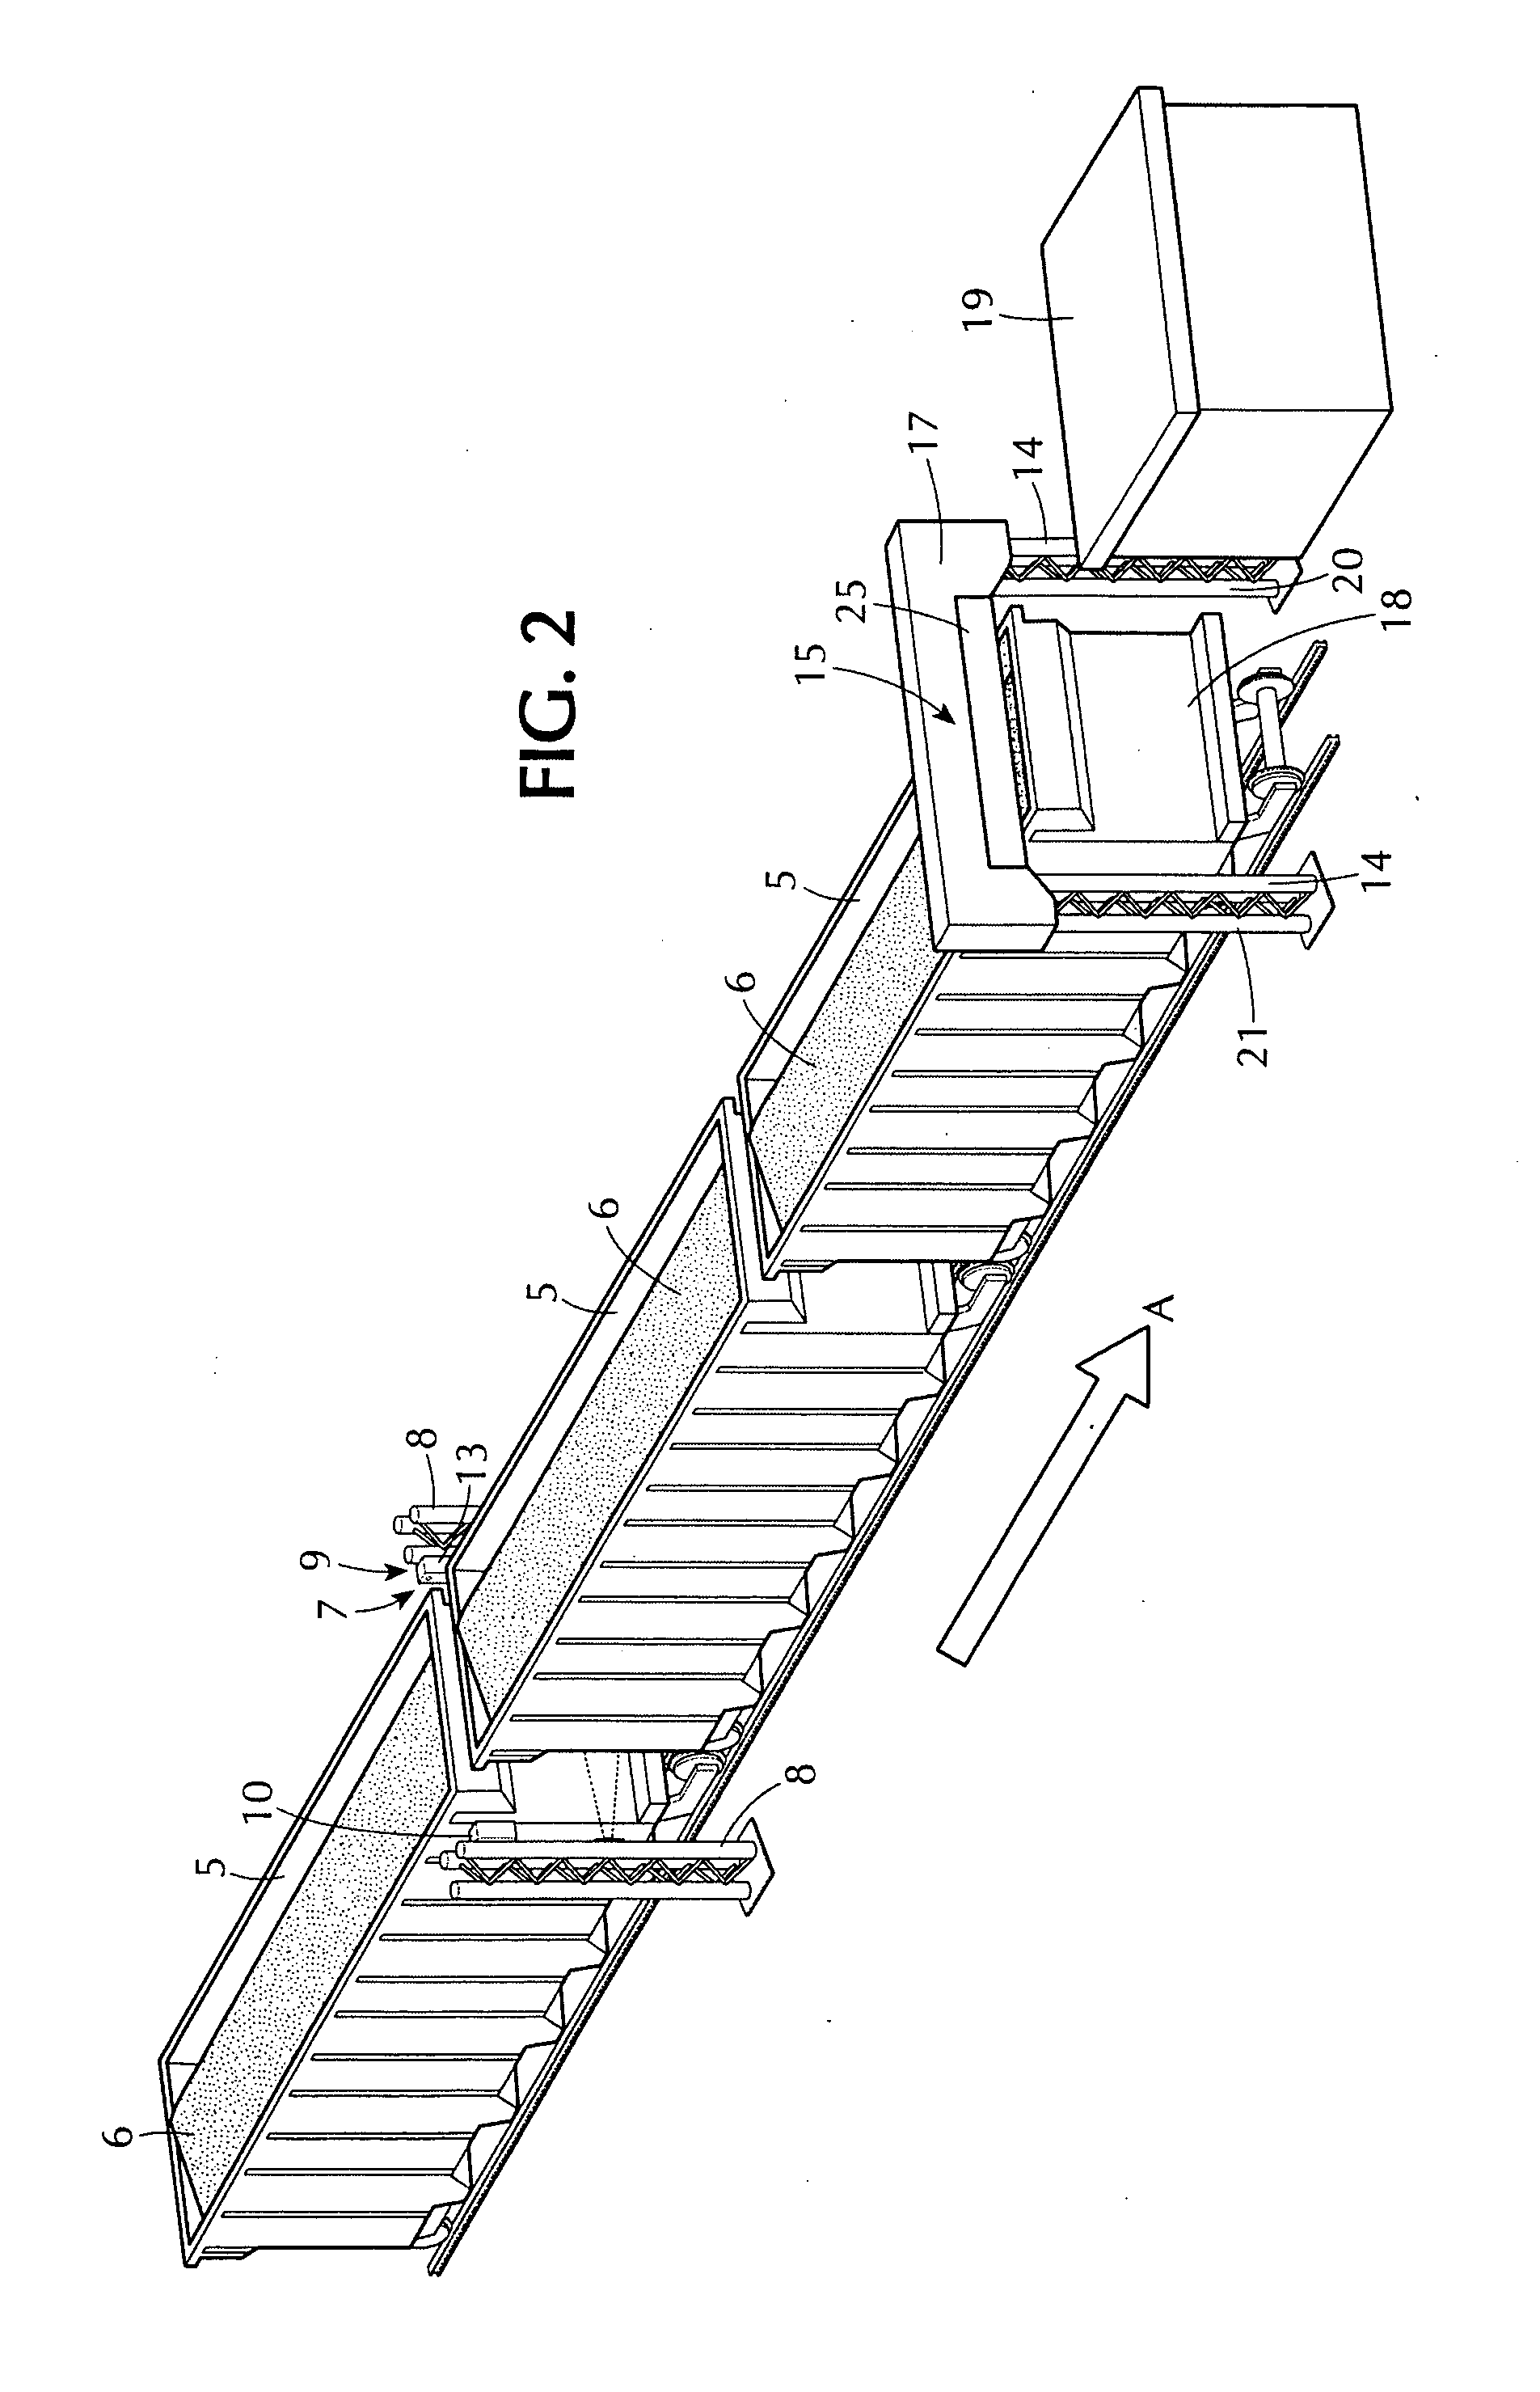 System and method for compacting materials in open top transport conveyance